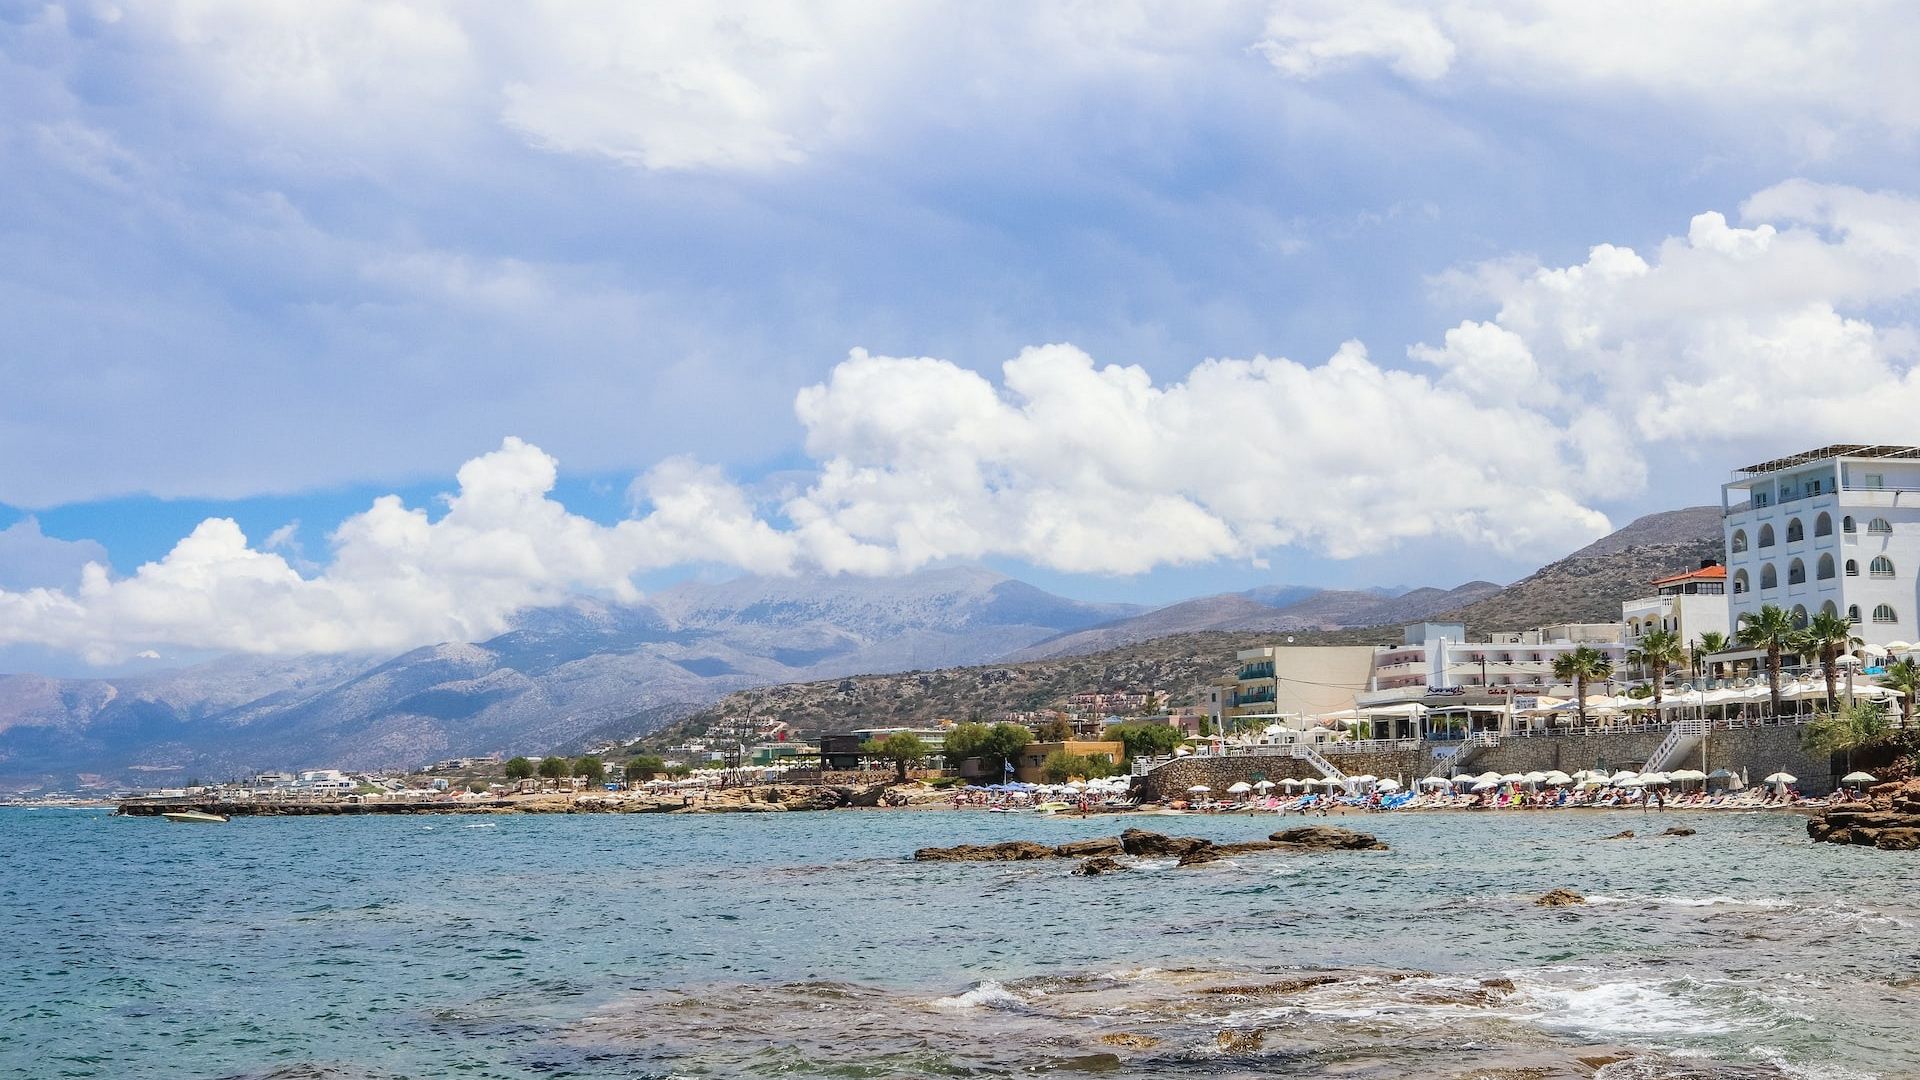 Attractions of Hersonissos: what to see in the city and nearby